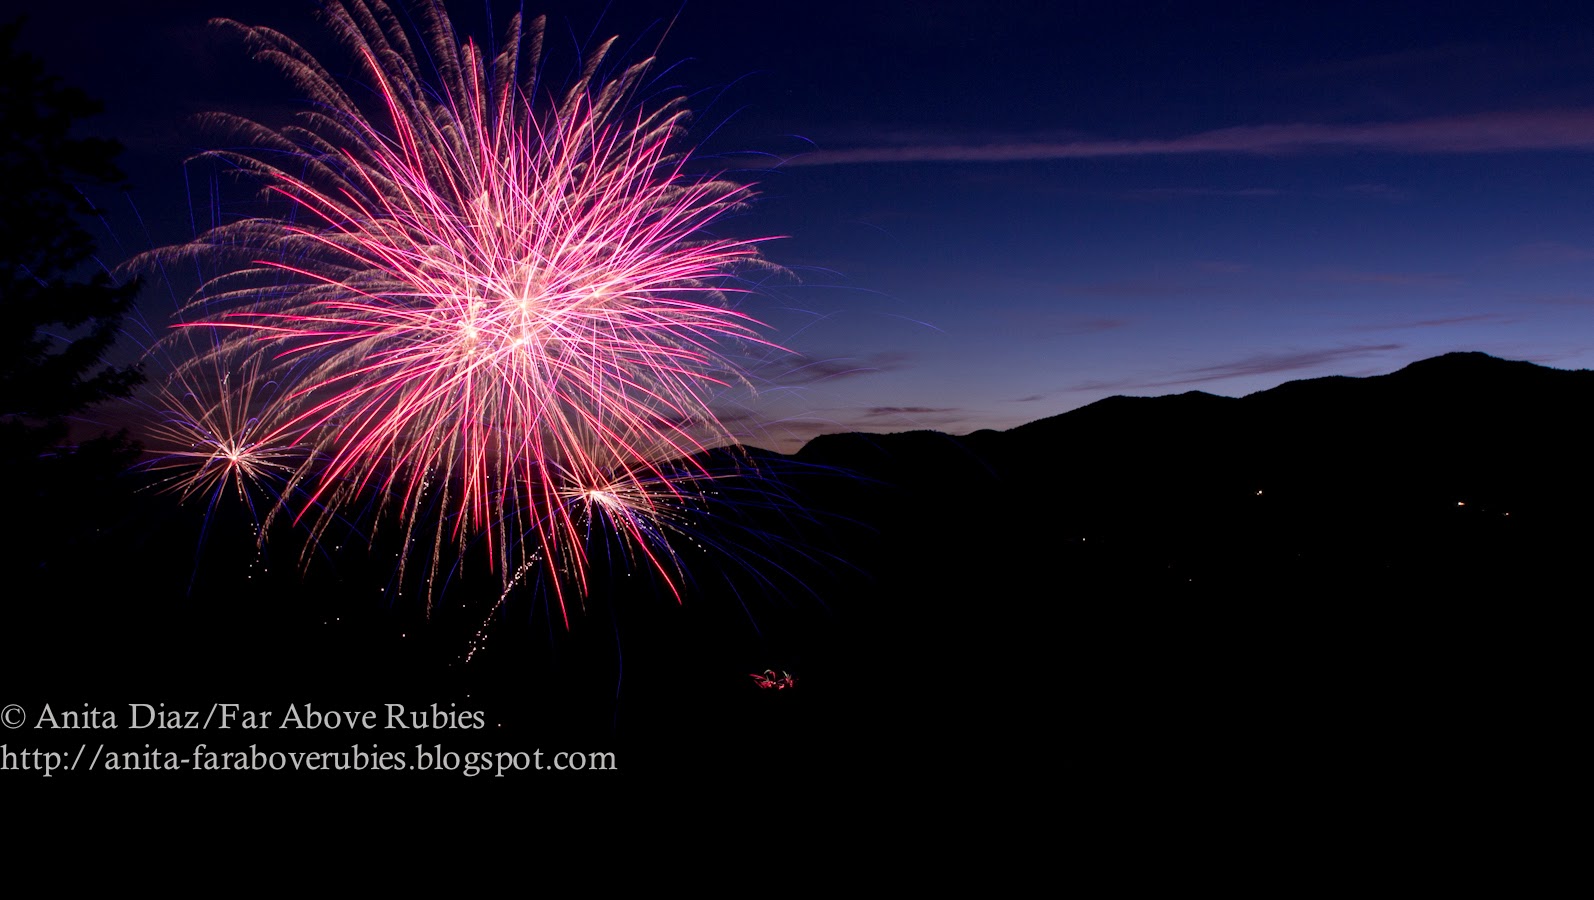 Capturing fireworks successfully…